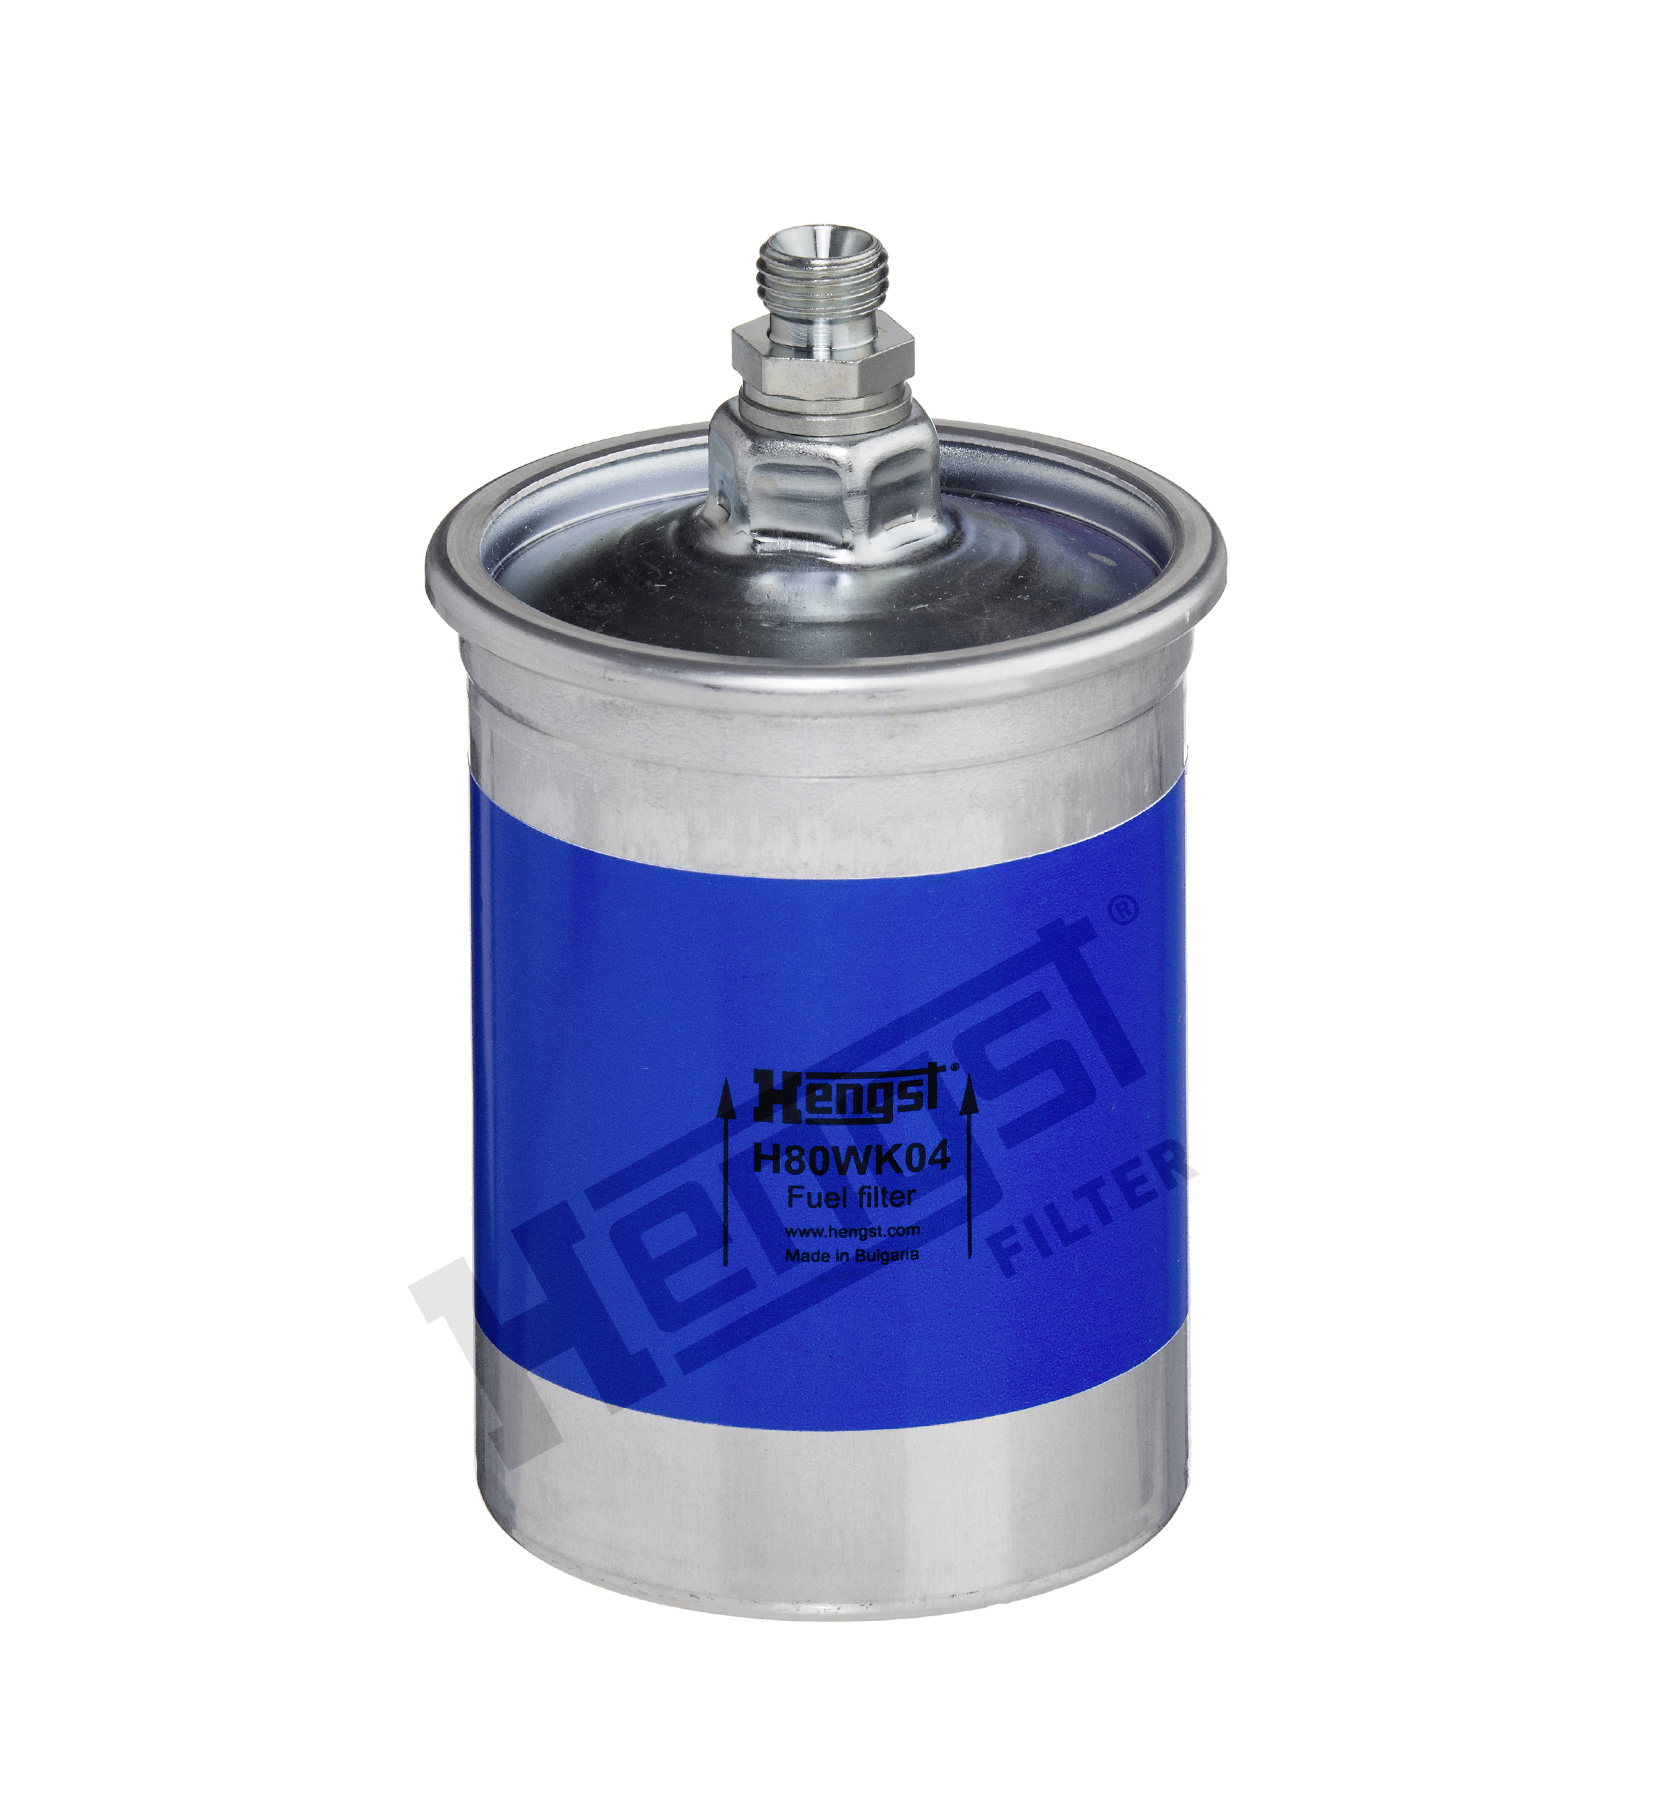 H80WK04 fuel filter in-line